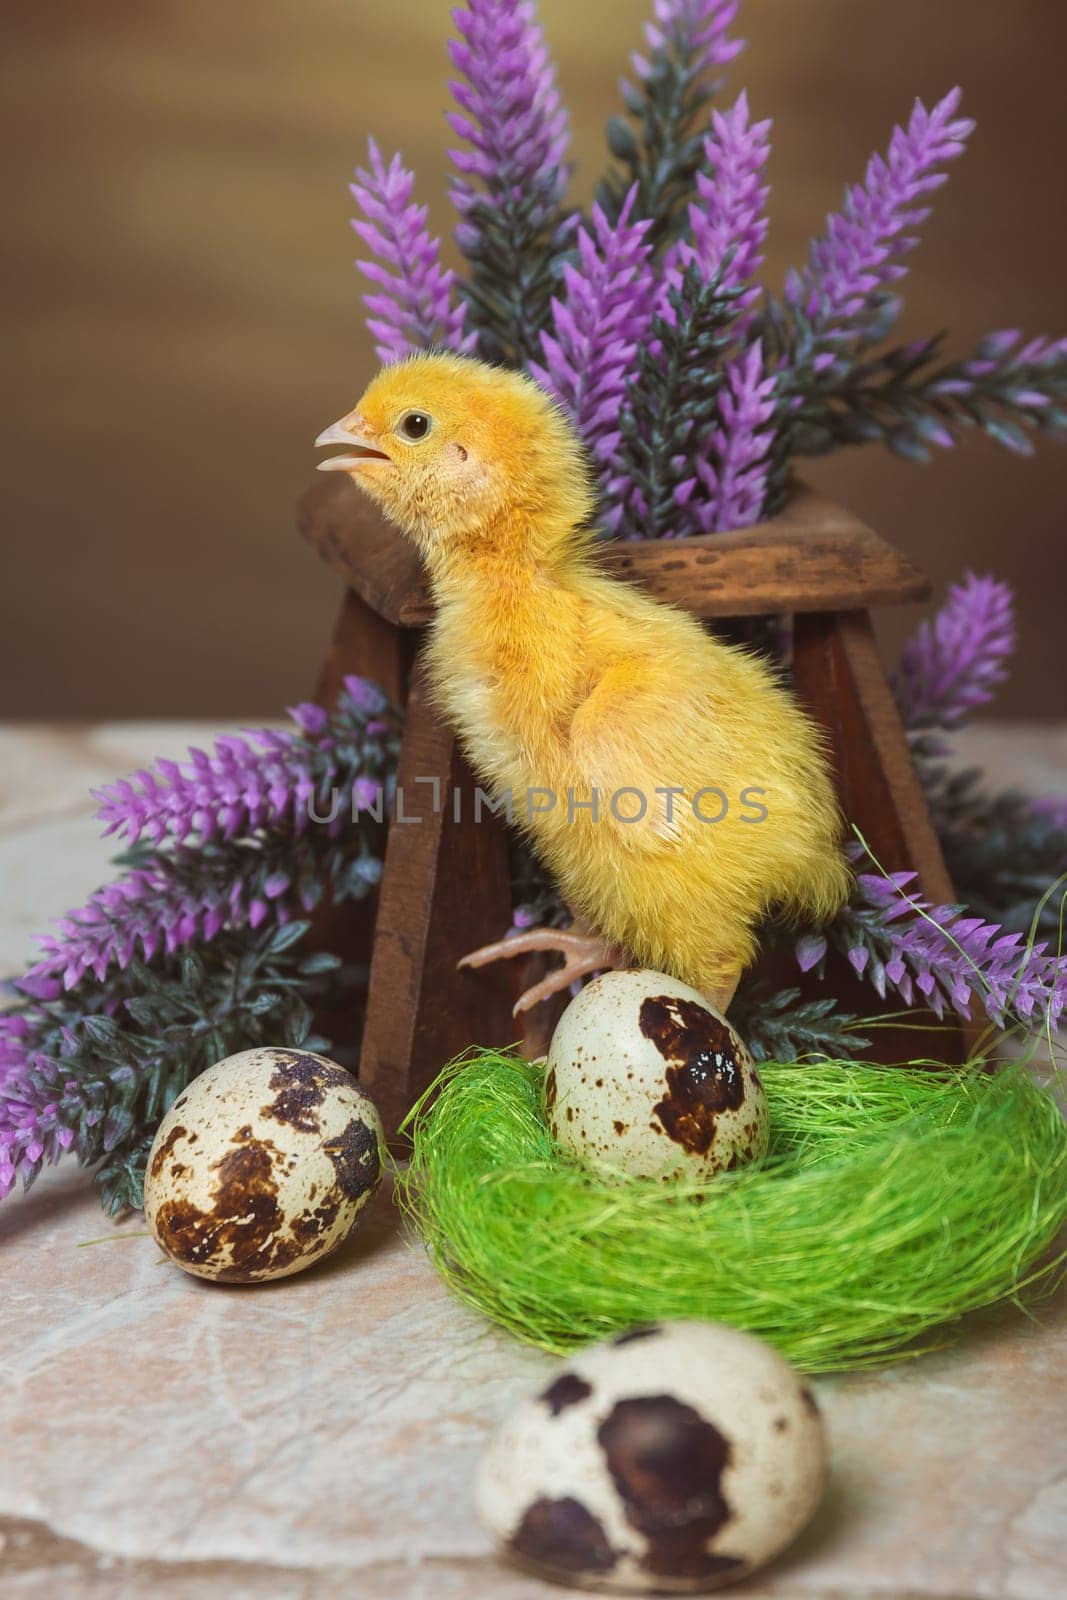 A small yellow quail chicken stands stretched out in the nest and screams by ElenaNEL